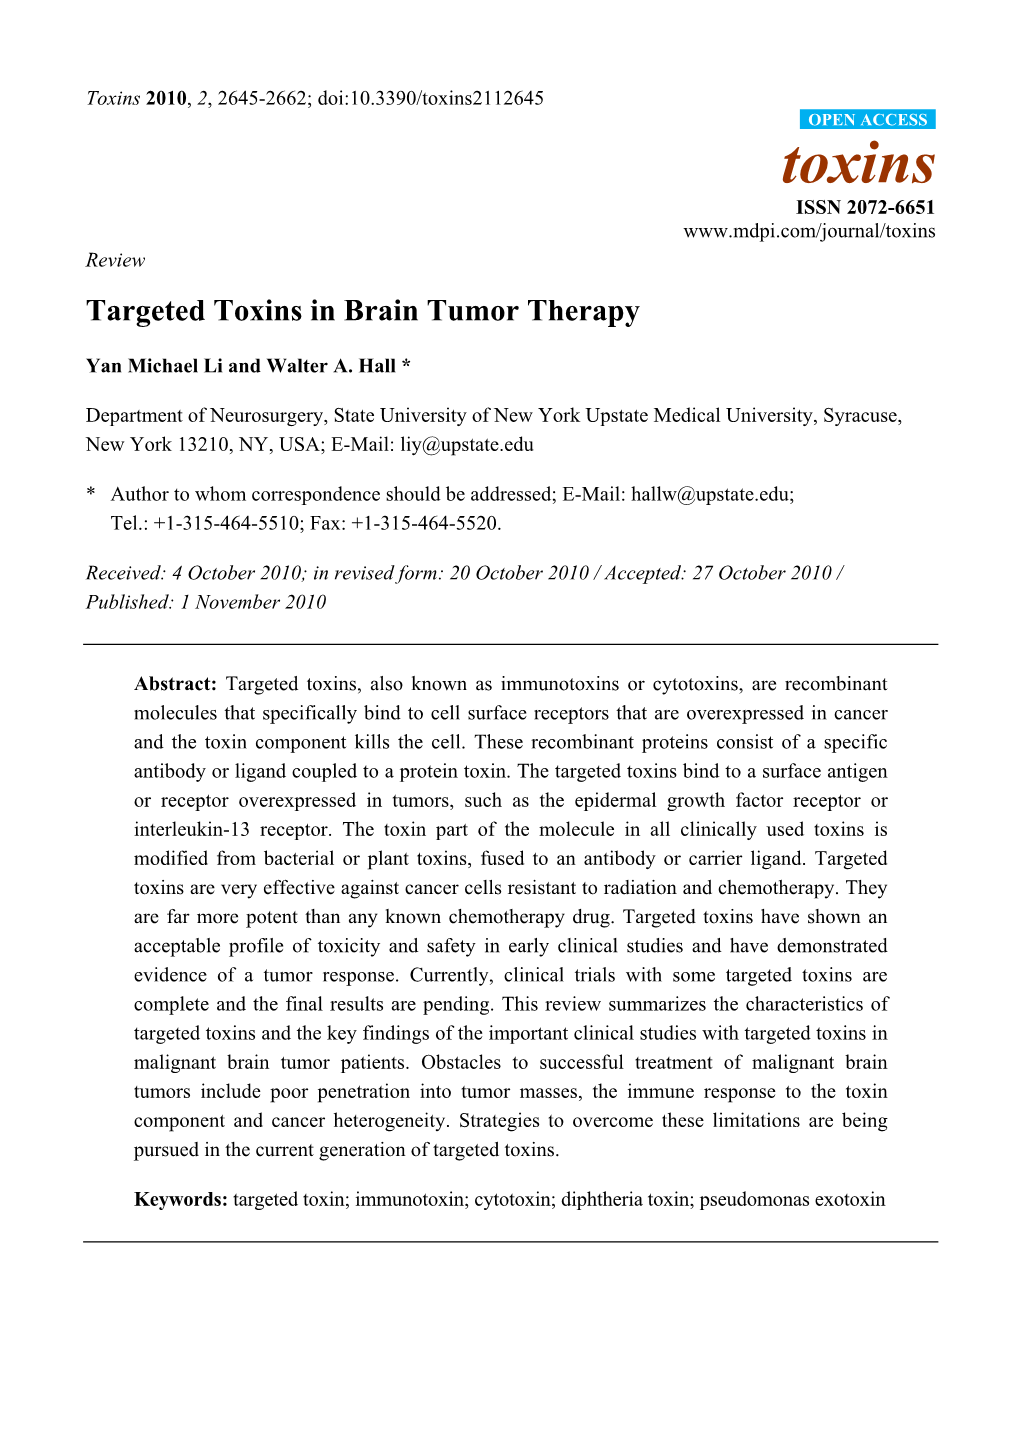 Targeted Toxins in Brain Tumor Therapy